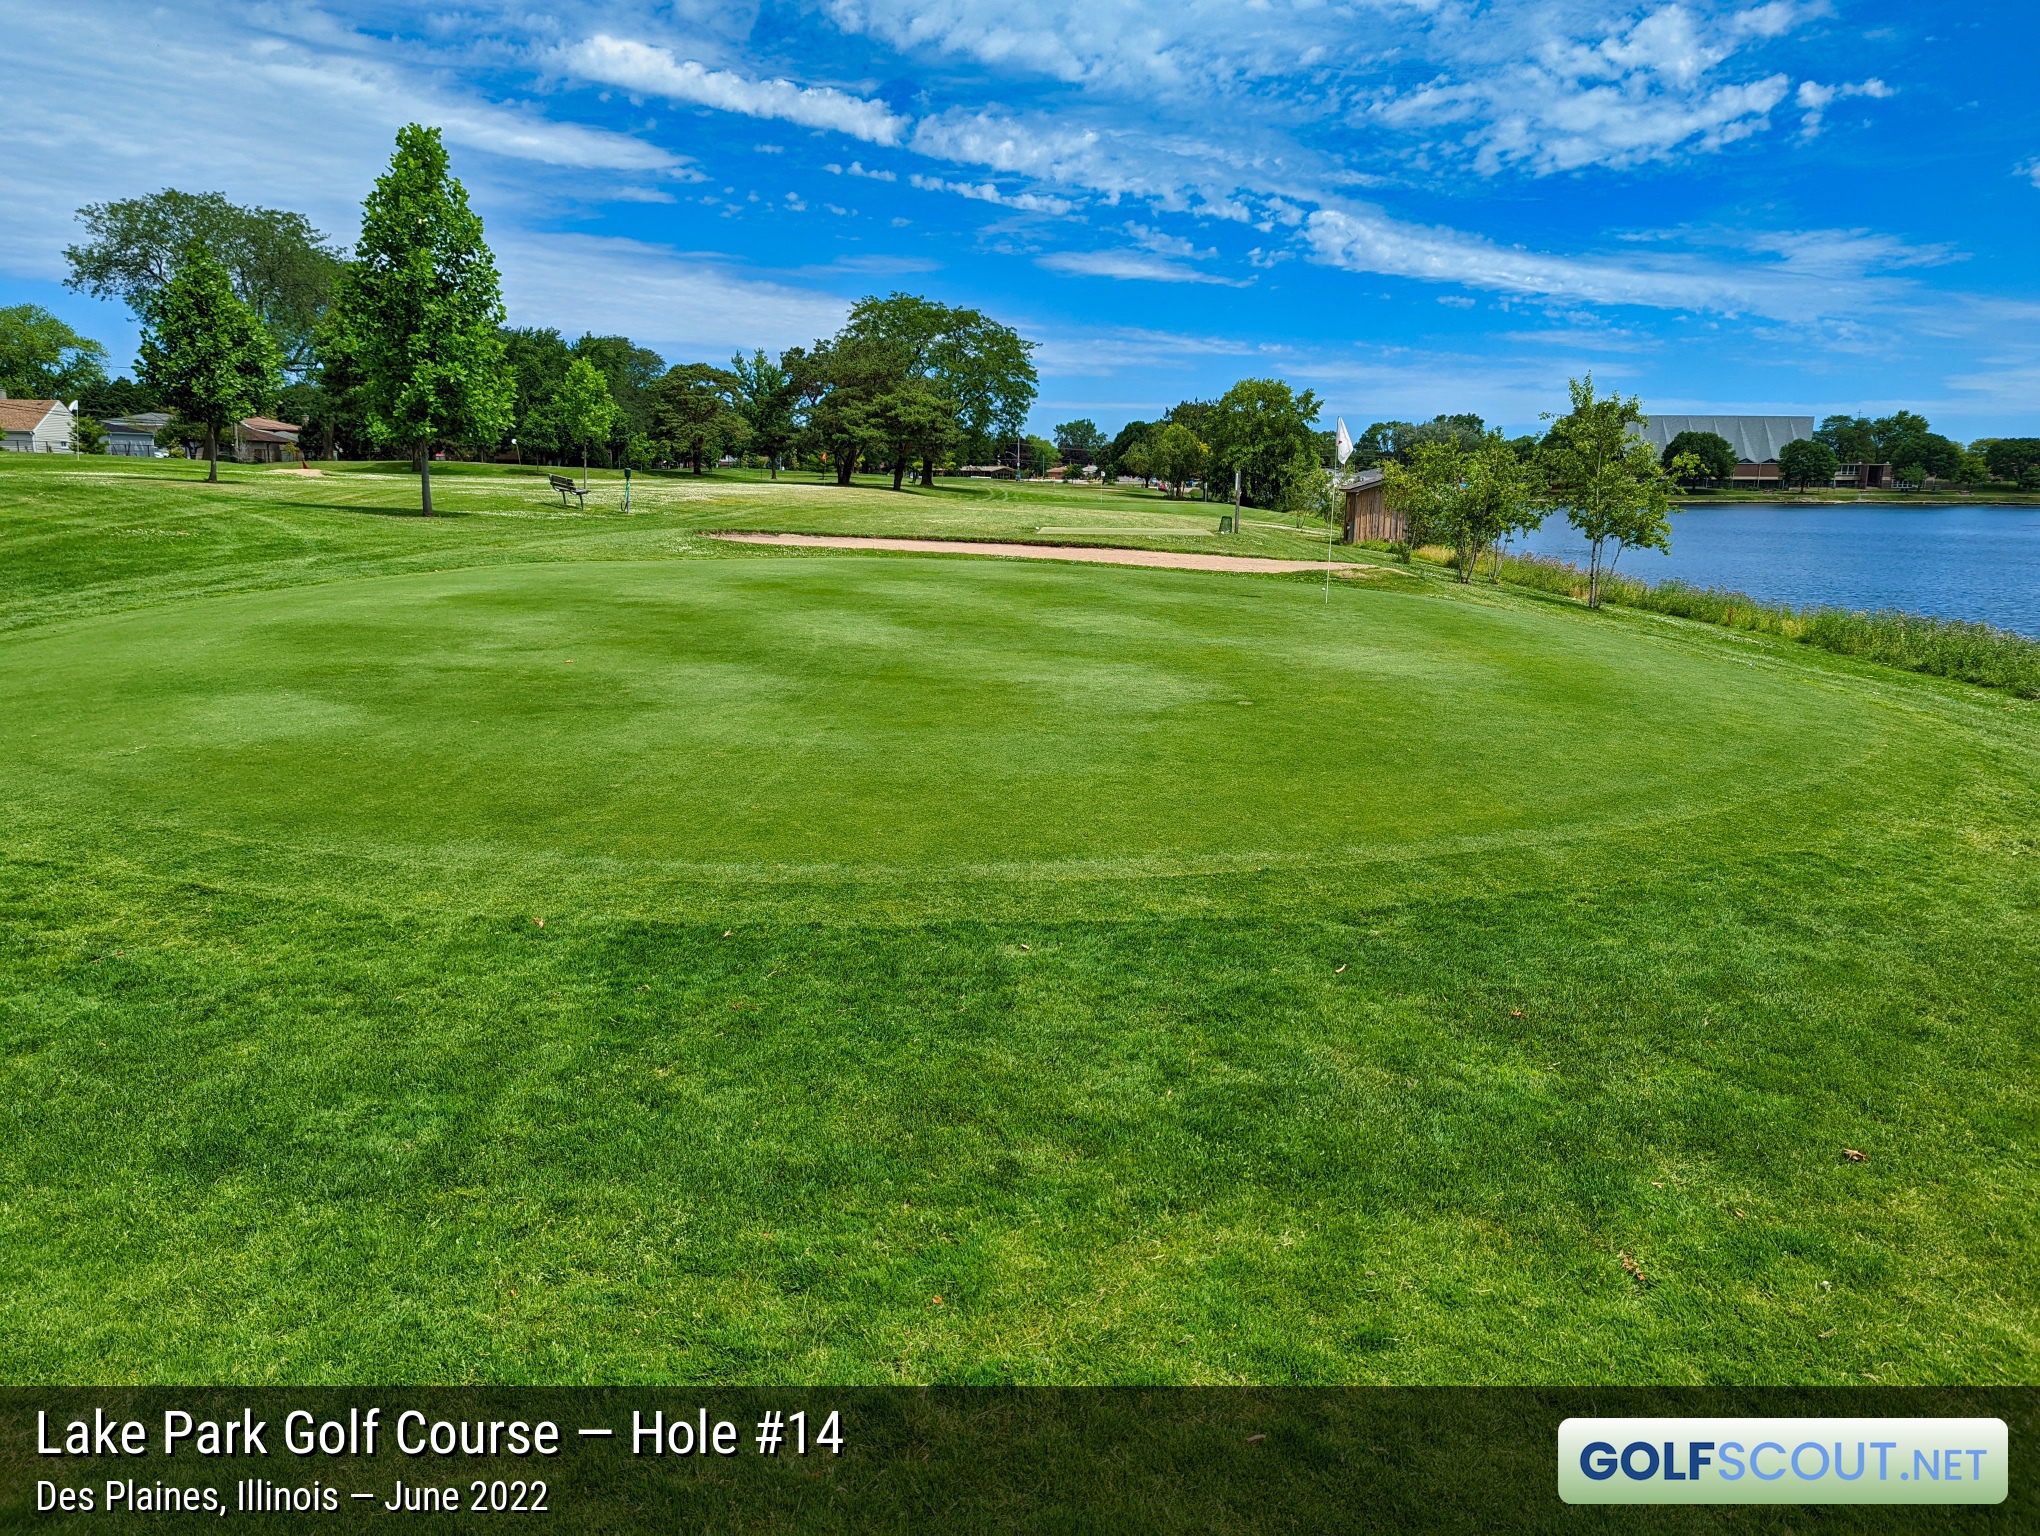 Photo of hole #14 at Lake Park Golf Course in Des Plaines, Illinois. 